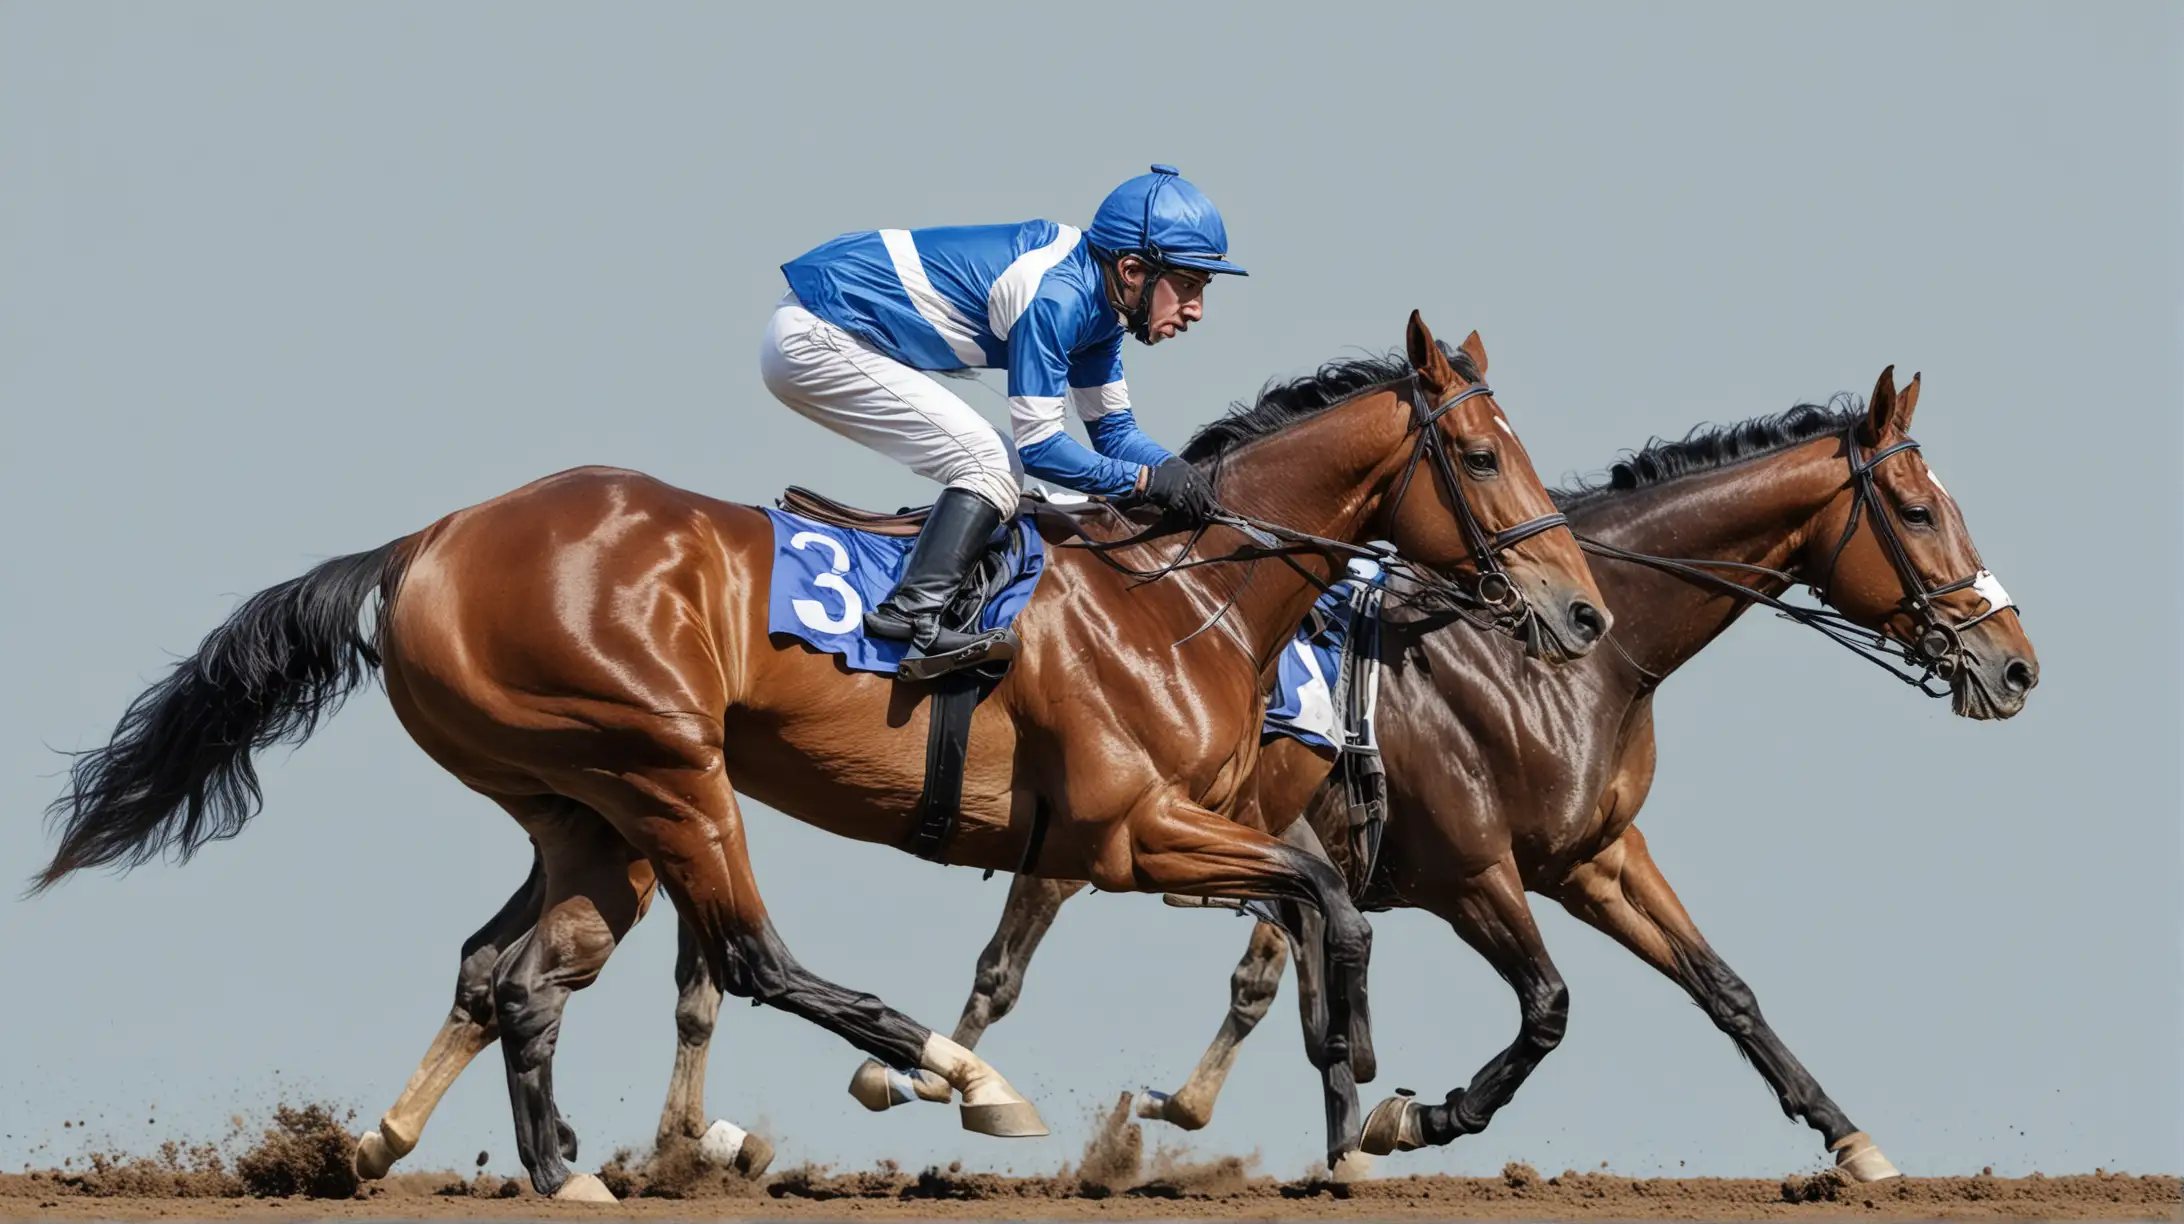 Racehorse with jockey at races. Isolated on a white background, blue jersey